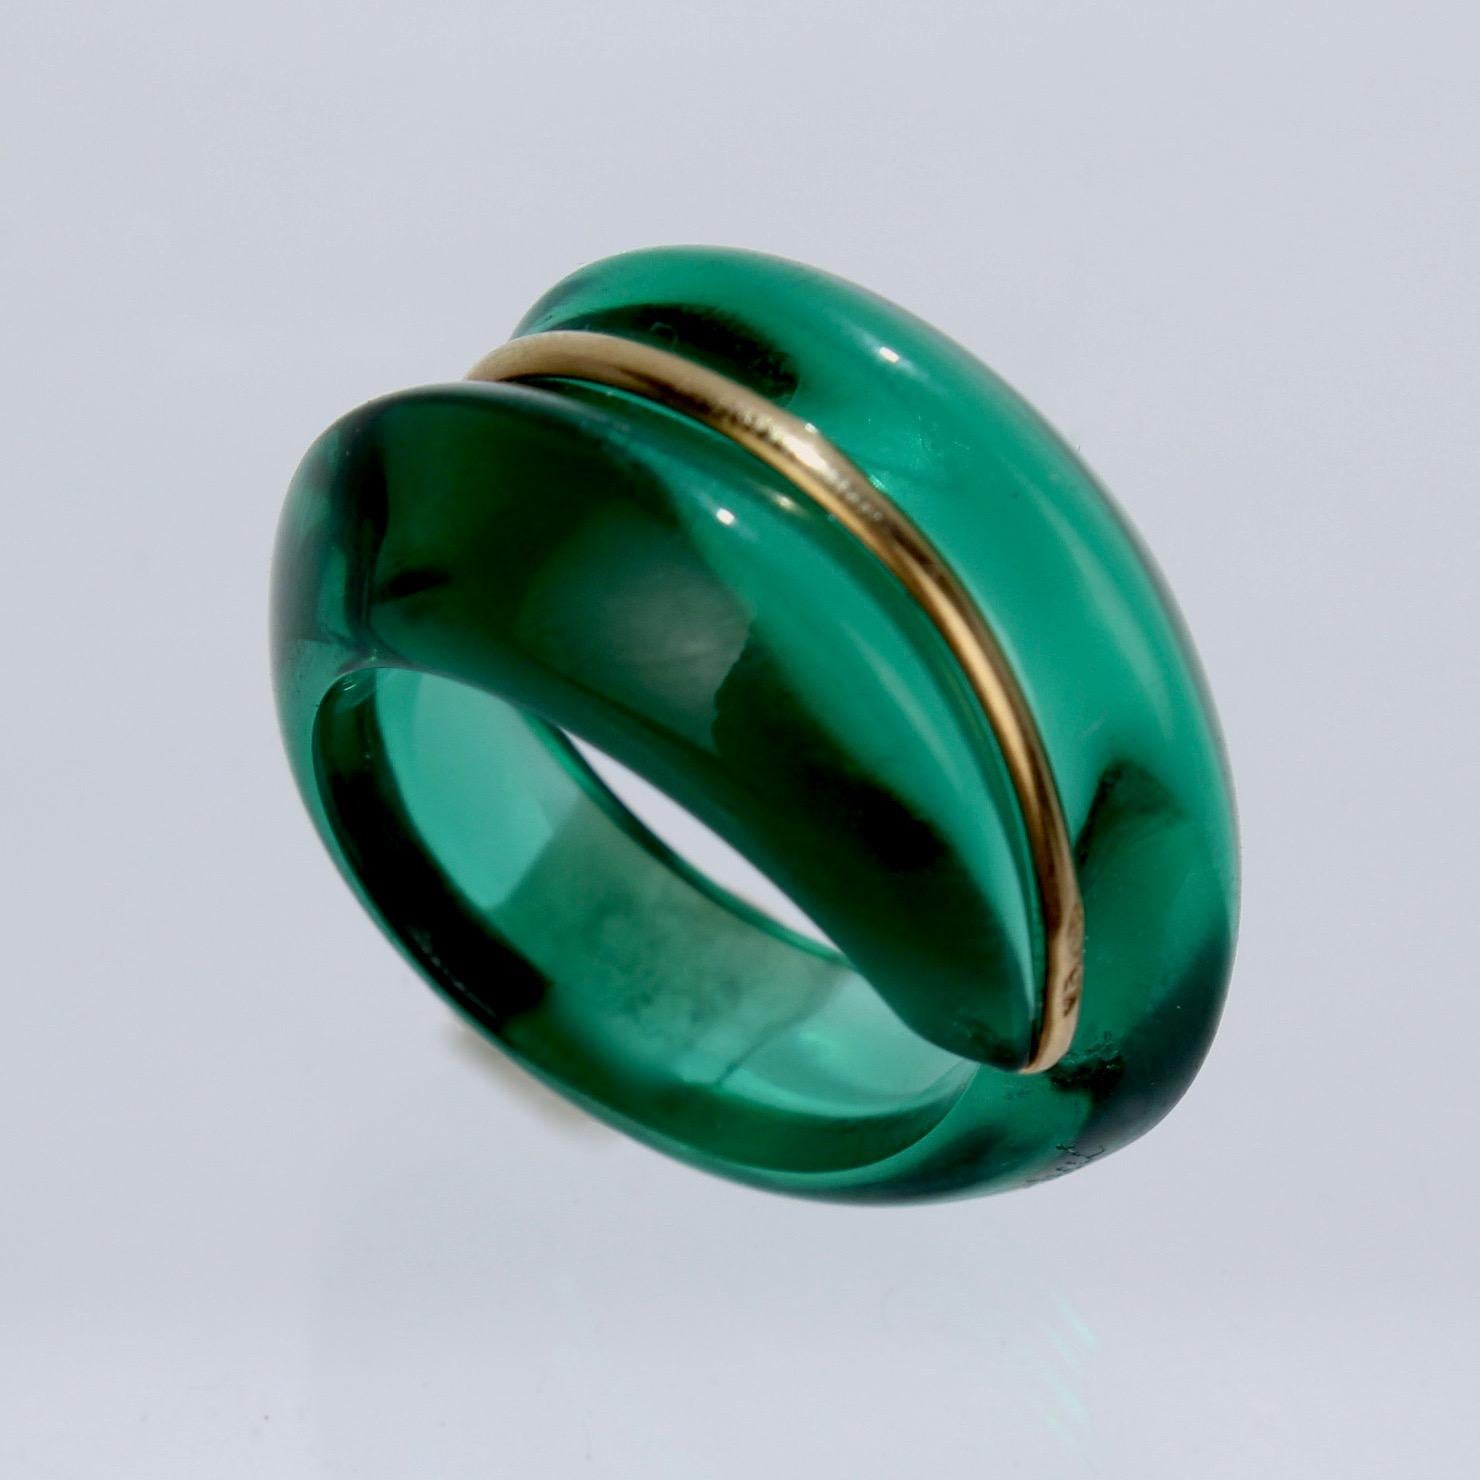 A wonderful Baccarat Coquillage ring.

In emerald green glass and 18k gold.

Great modernist jewelry design from France's premier glass house!

Marked with an acid-etched Baccarat factory mark, a French assay mark, and 750 for 18k gold